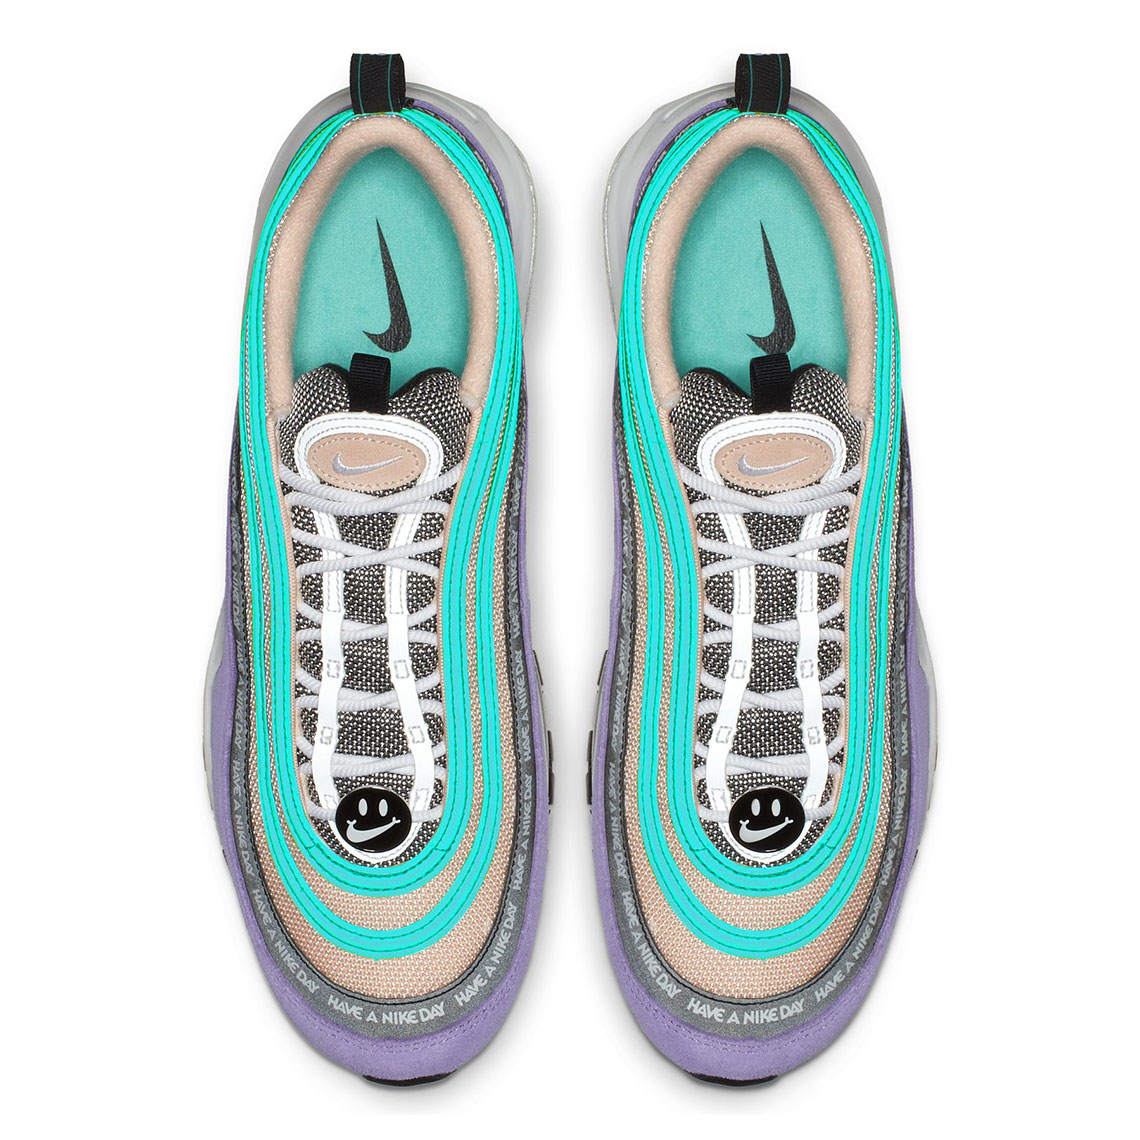 Nike Air Max 97 Have A Nike Day Release Date 4